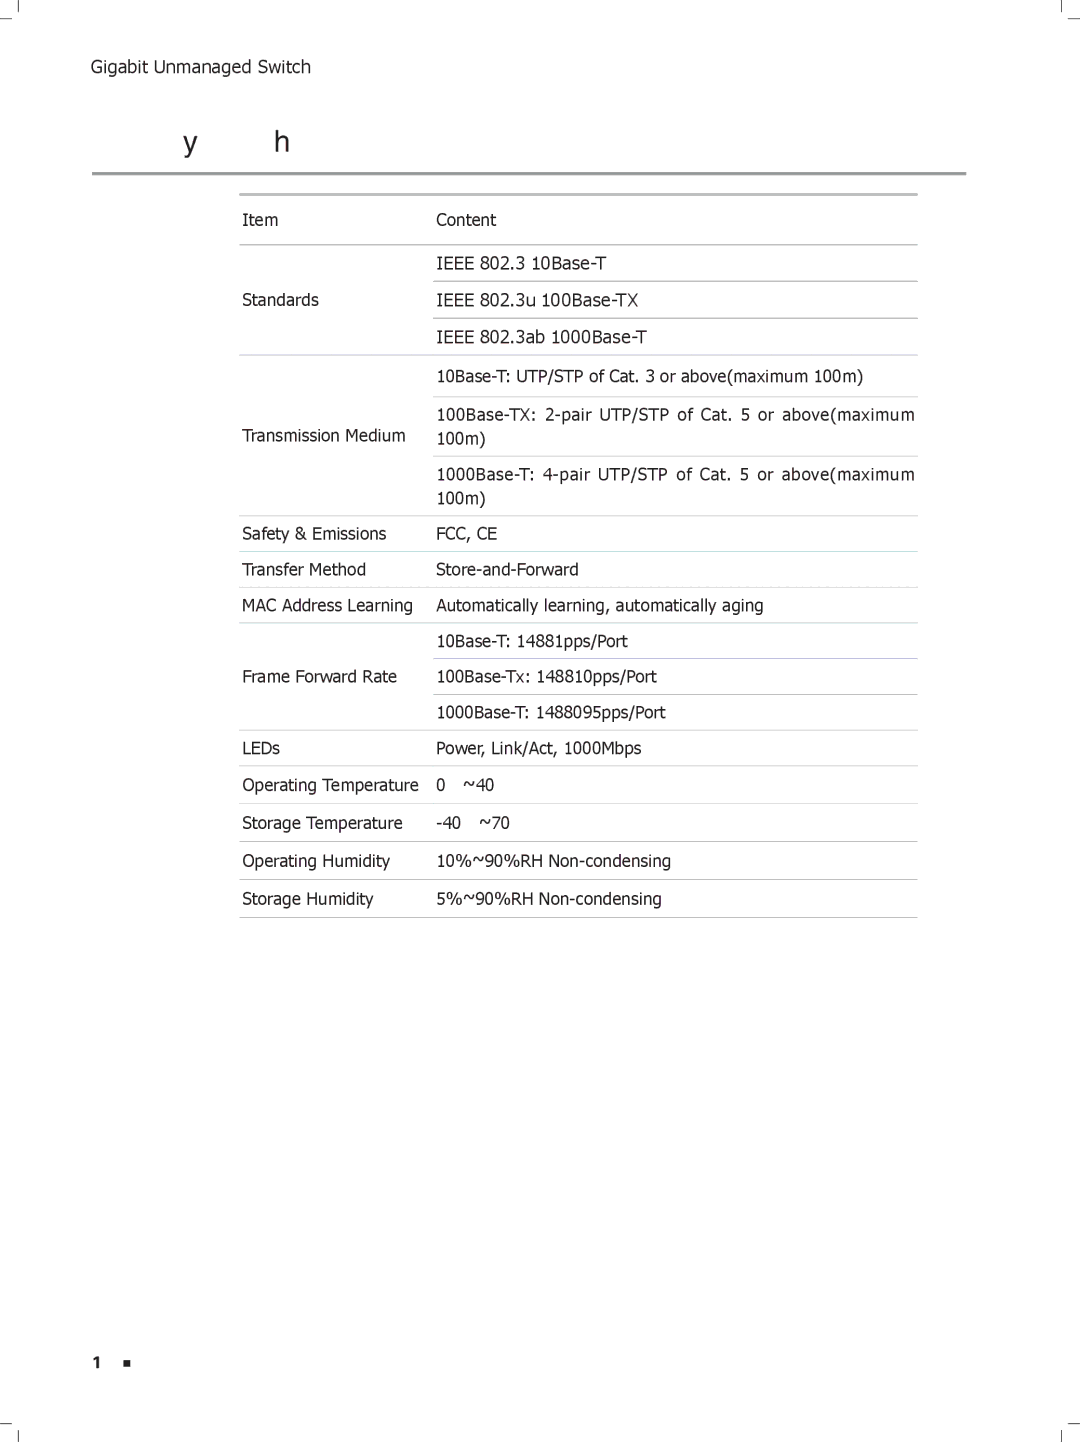 TP-Link tl-sg1048, TL-SG1016D, TL-SG1008, TL-SG1024D manual Appendix B Specifications, Fcc, Ce 